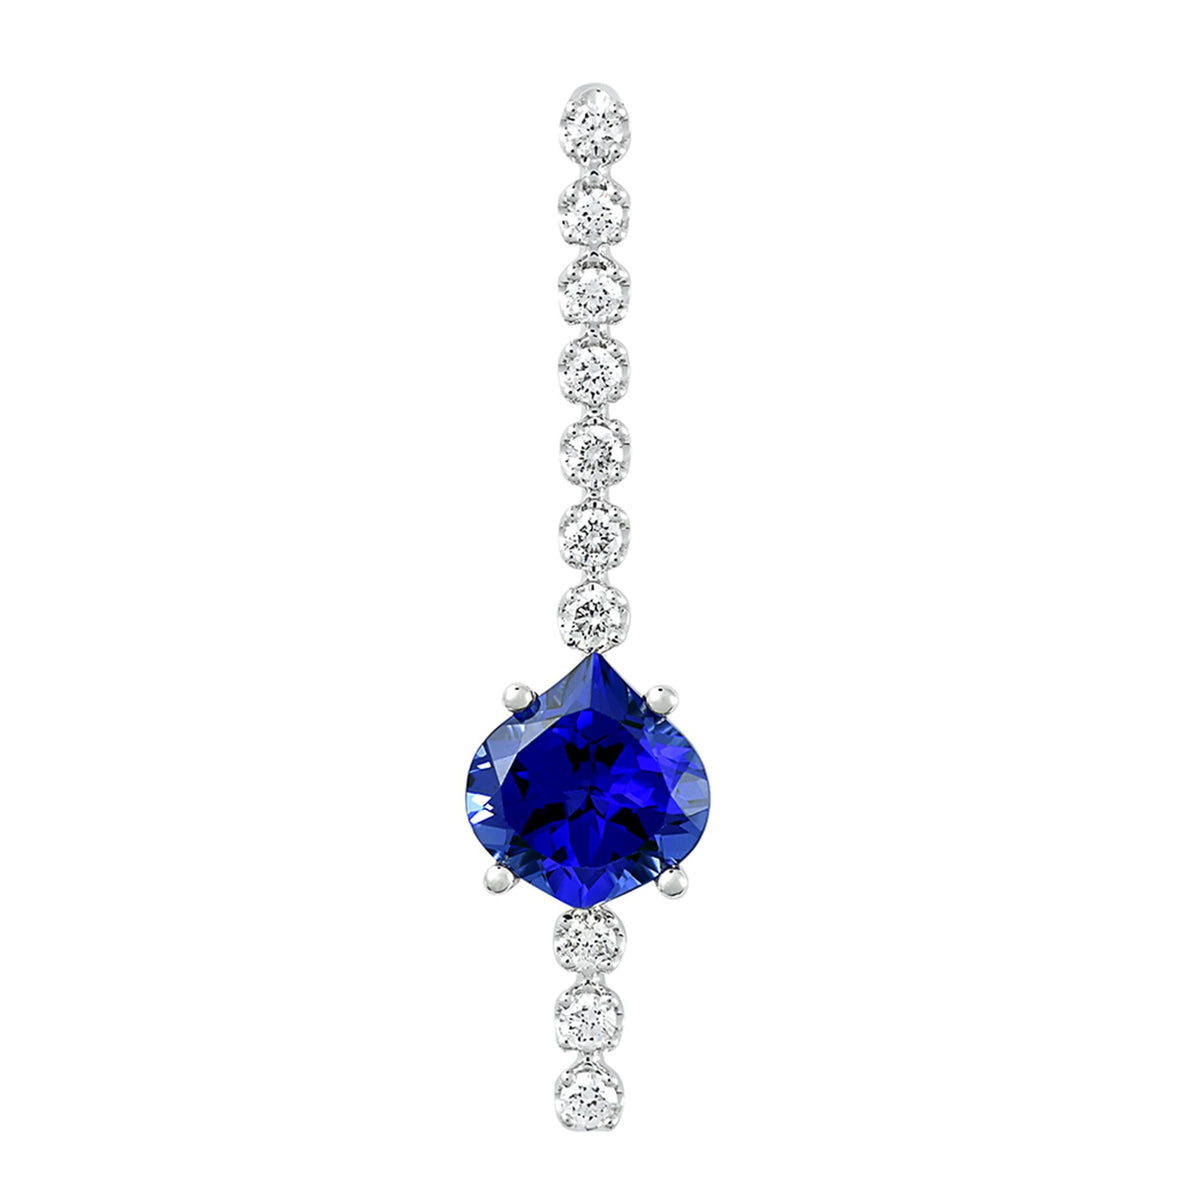 14Kt White Gold Stiletto-Style  Pendant With 2.27ct Chatham Lab Created Blue Sapphire